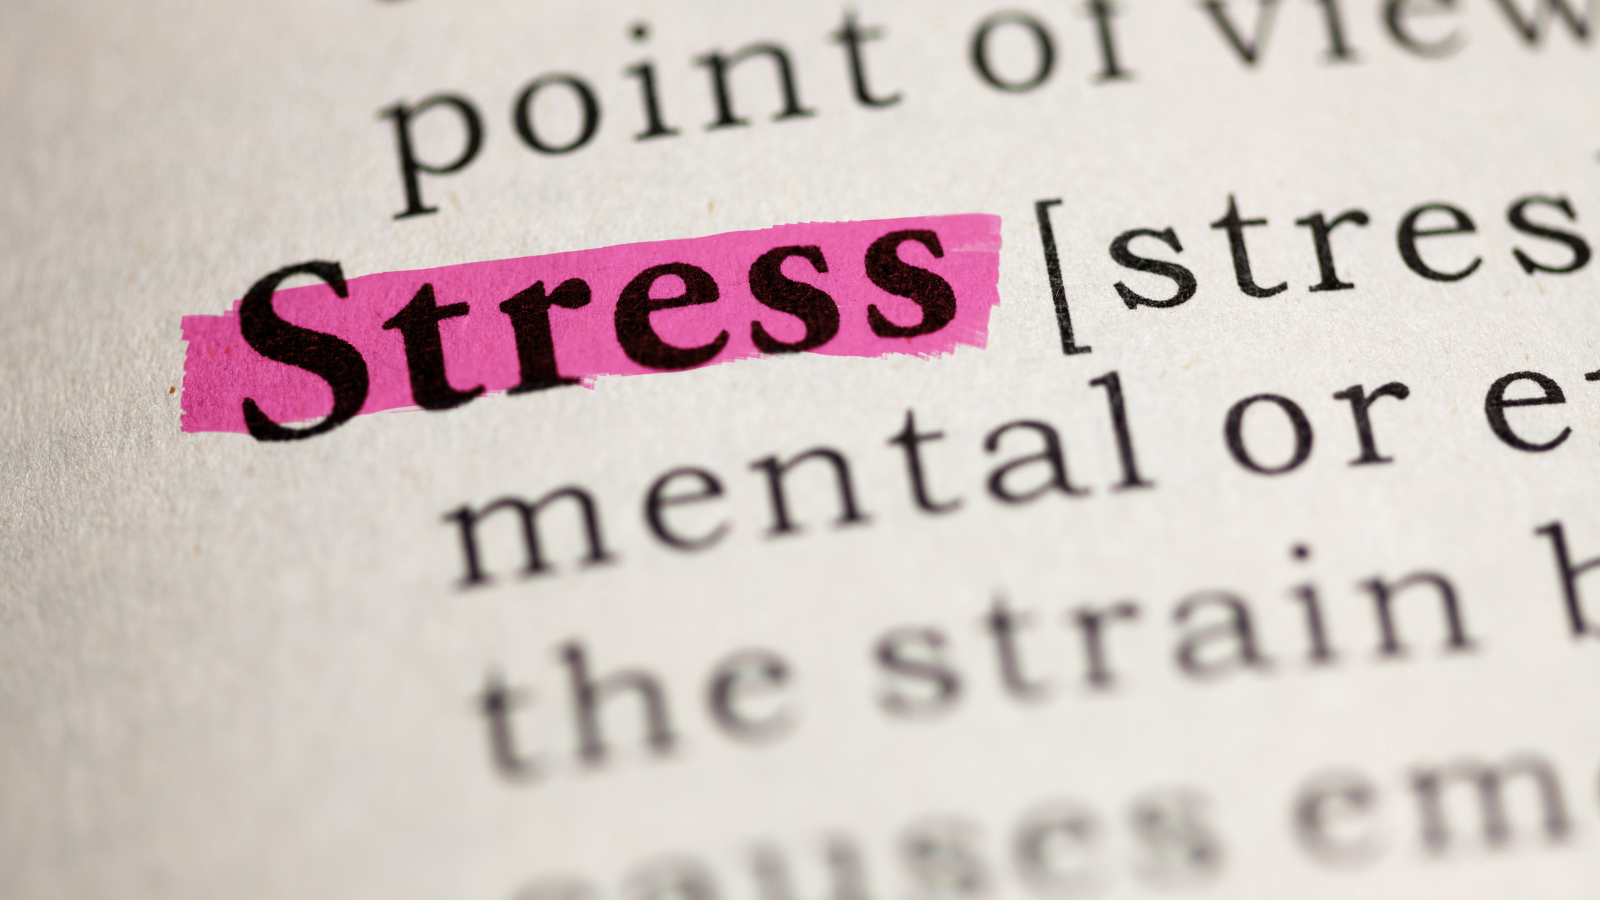 How stress affects health and longevity